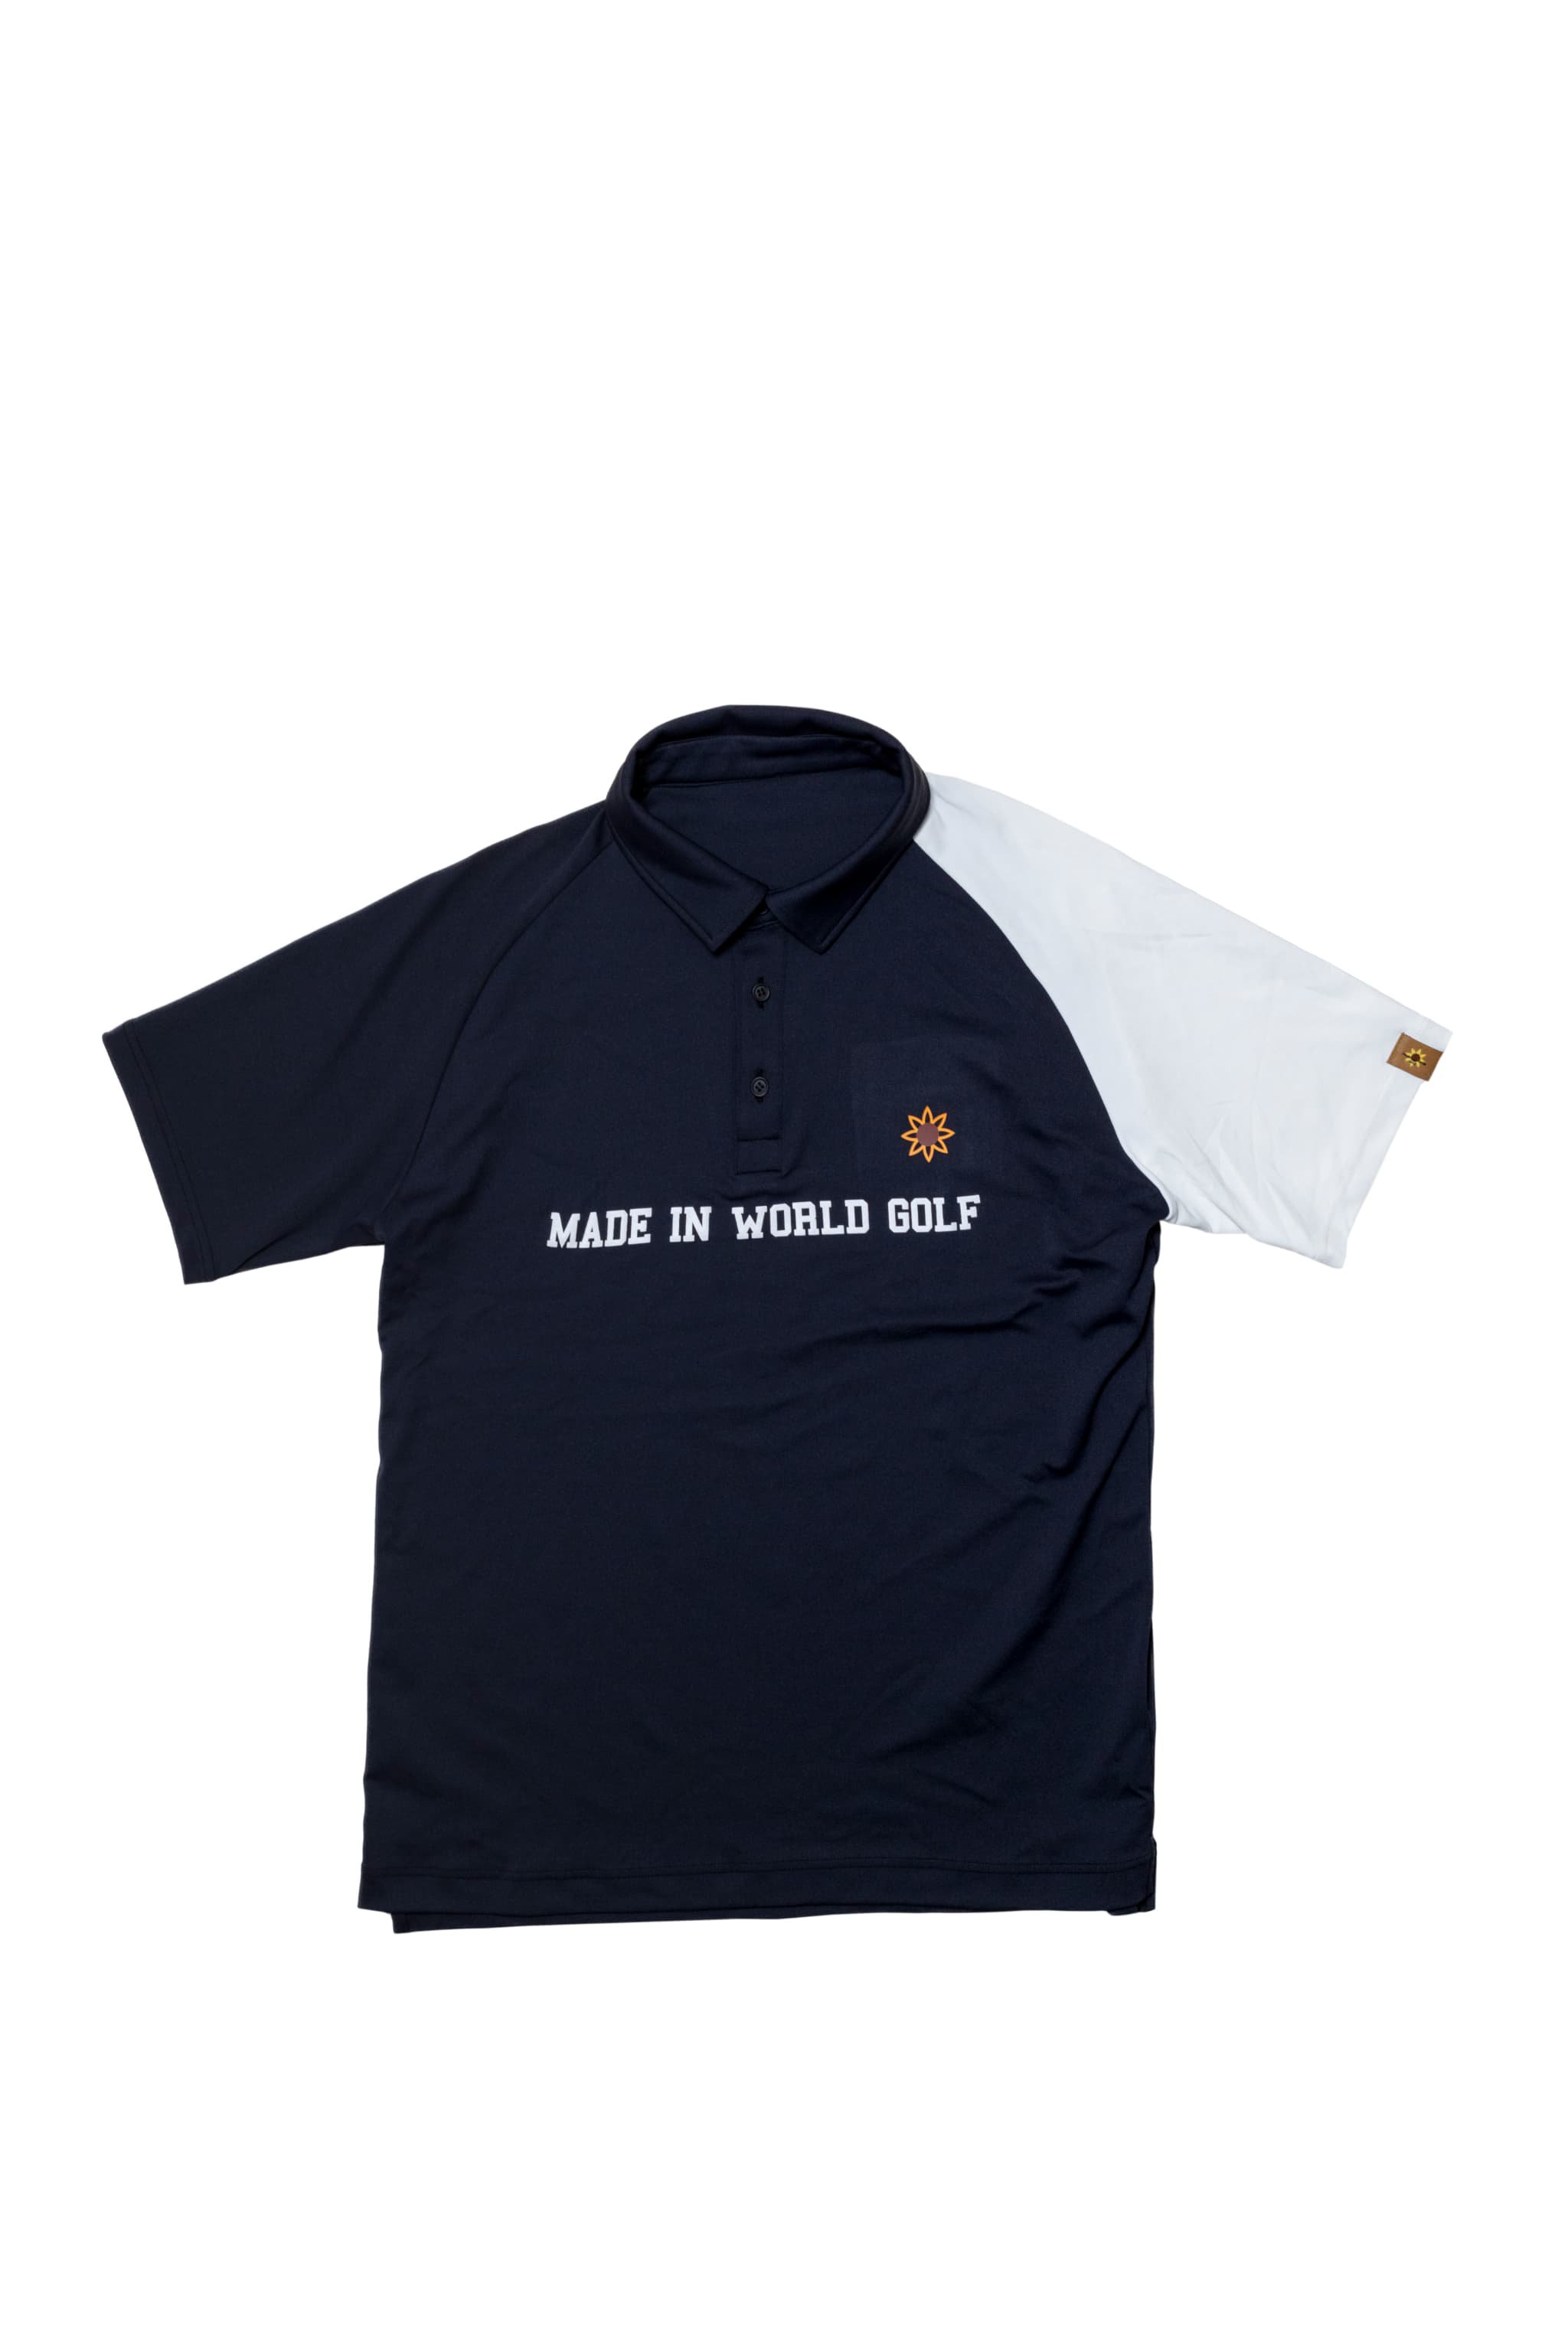 <img class='new_mark_img1' src='https://img.shop-pro.jp/img/new/icons50.gif' style='border:none;display:inline;margin:0px;padding:0px;width:auto;' />SMOOTH POLO<br />black